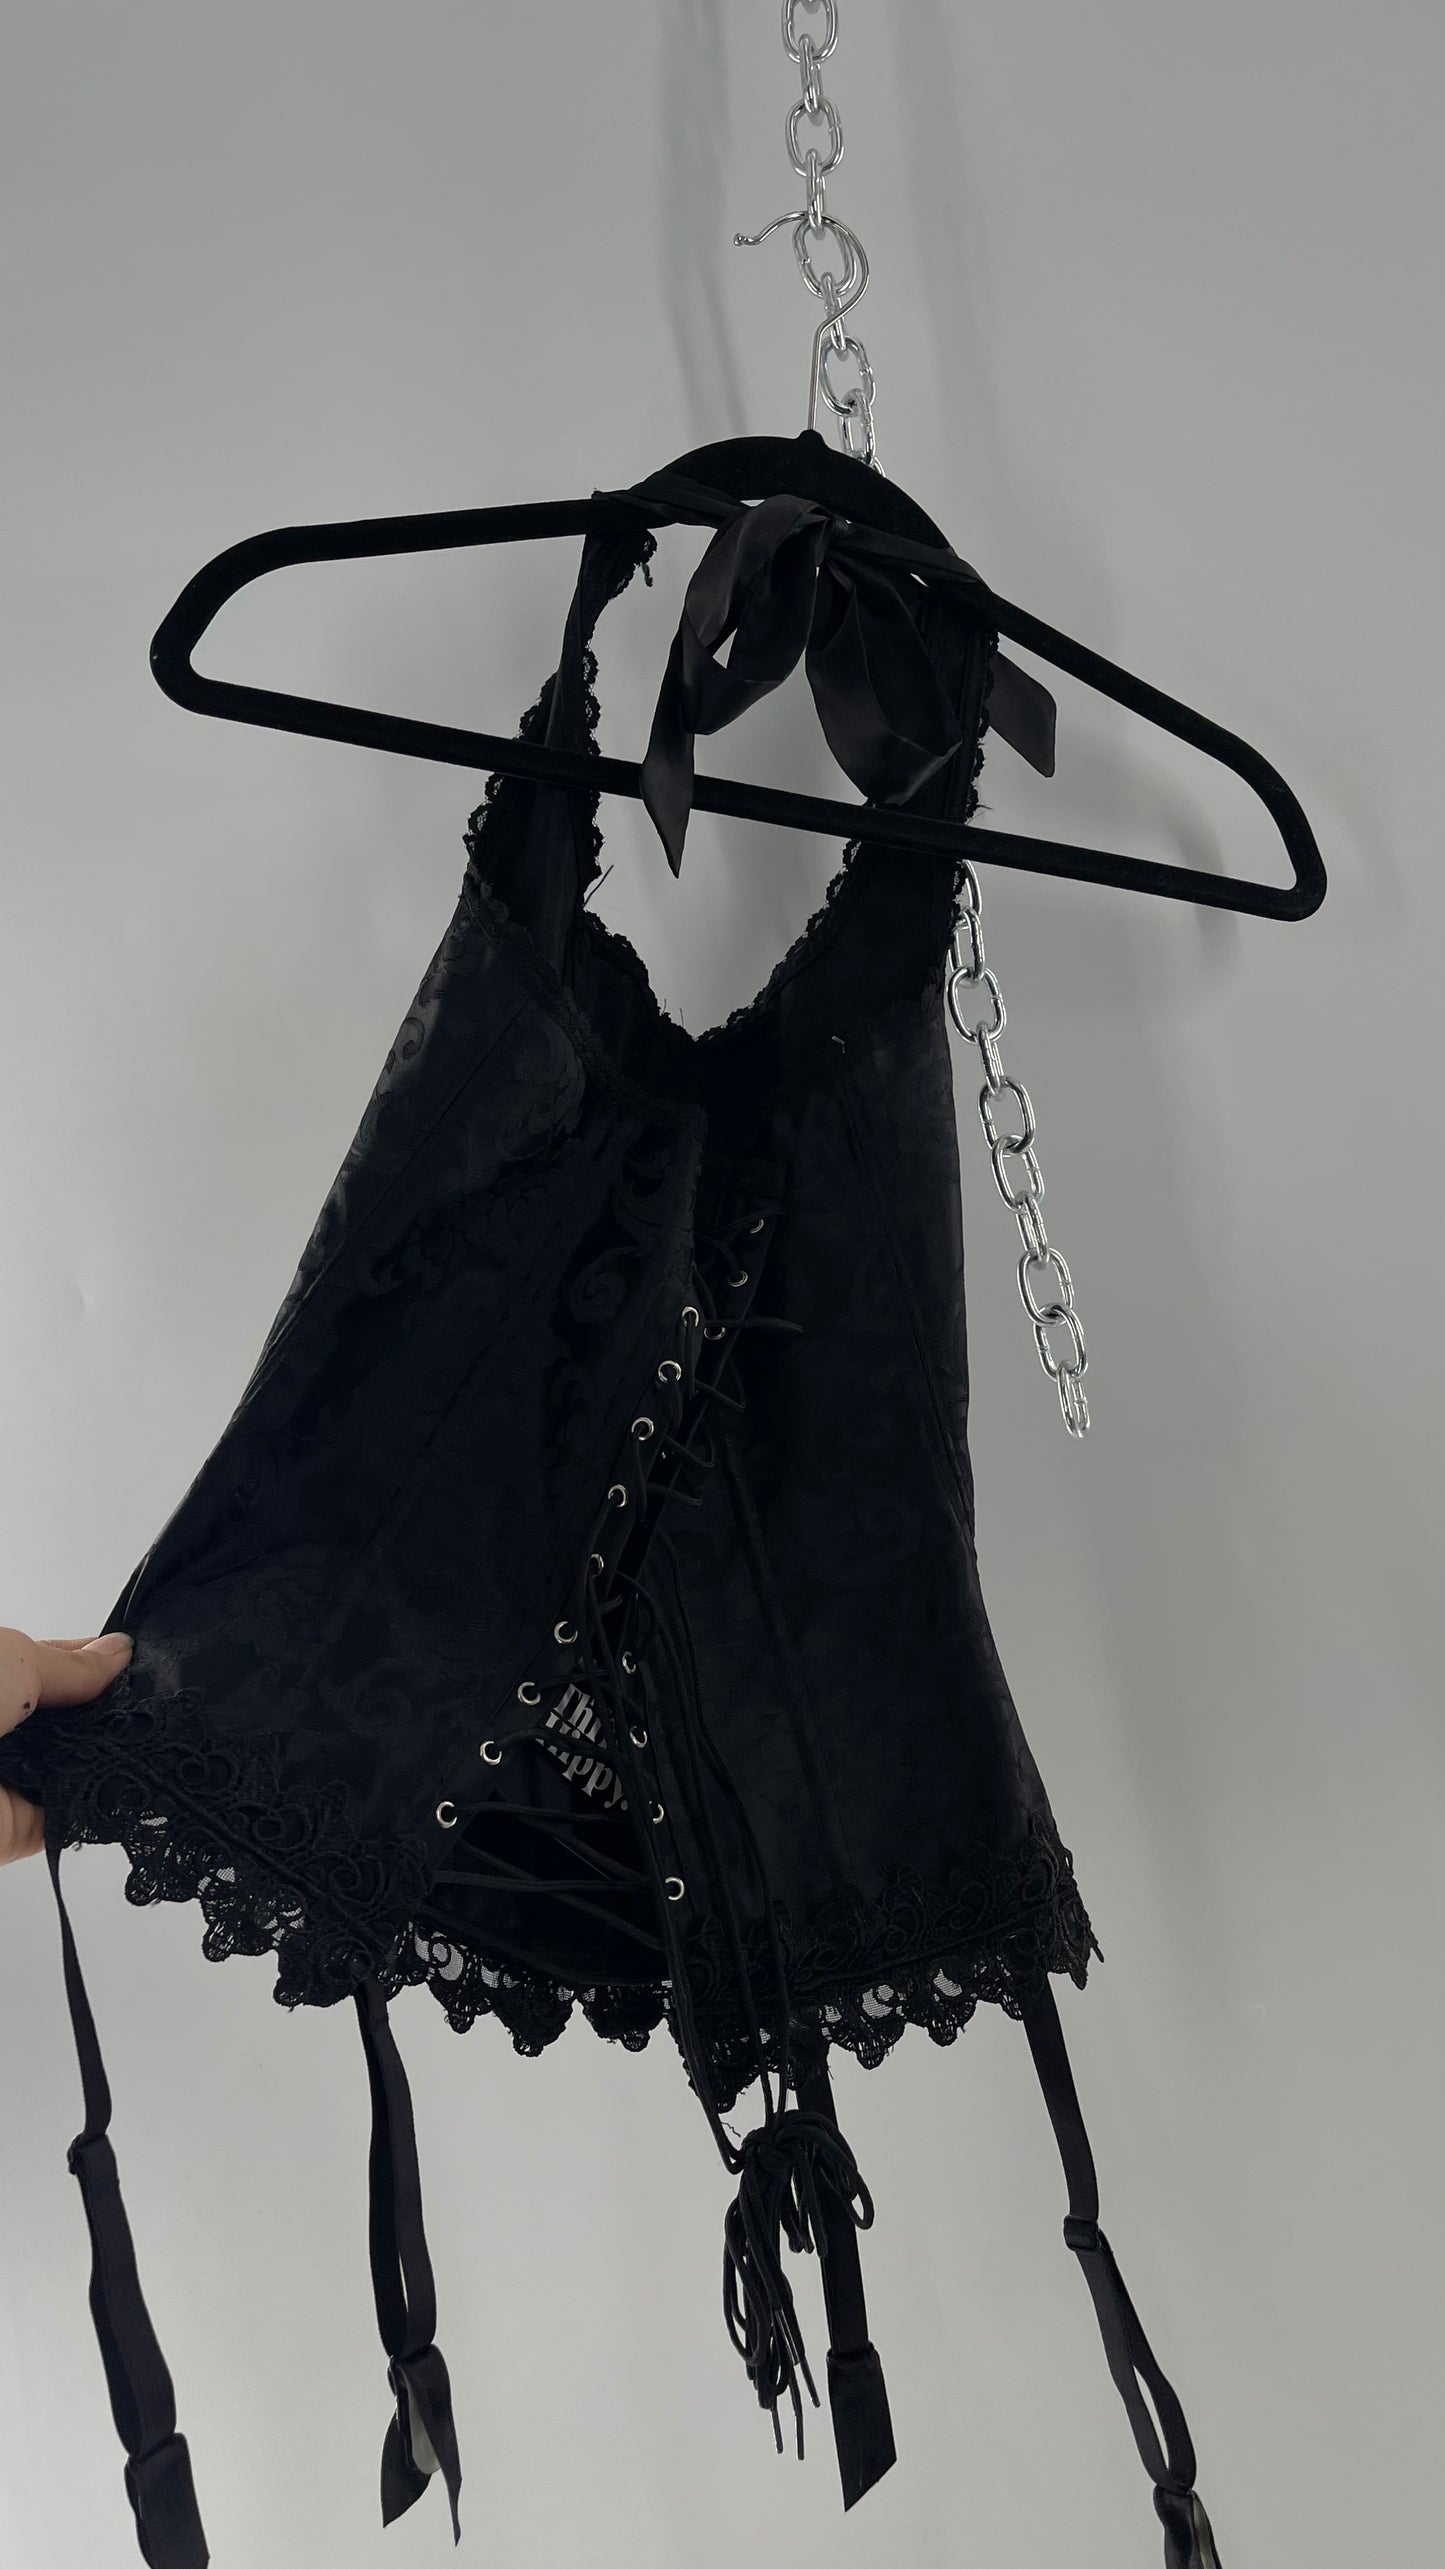 Vintage Fredericks of Hollywood Black Satin Brocade Lace Corset with Lace Tie Halter  (32)